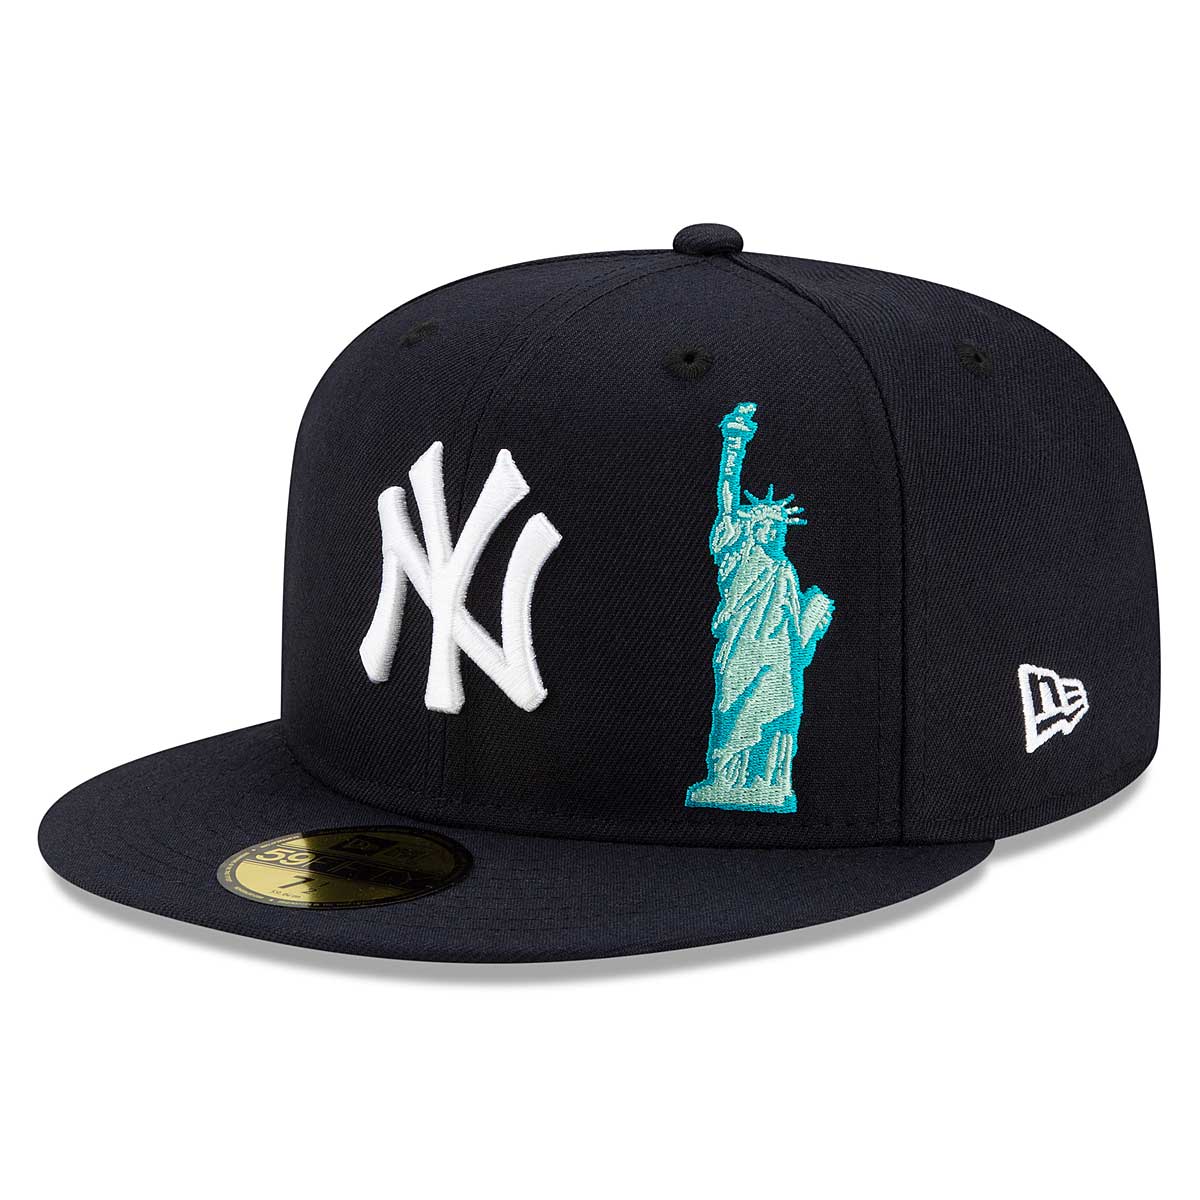 Buy MLB NEW YORK YANKEES CITY DESCRIBE 59FIFTY CAP for EUR 33.90 